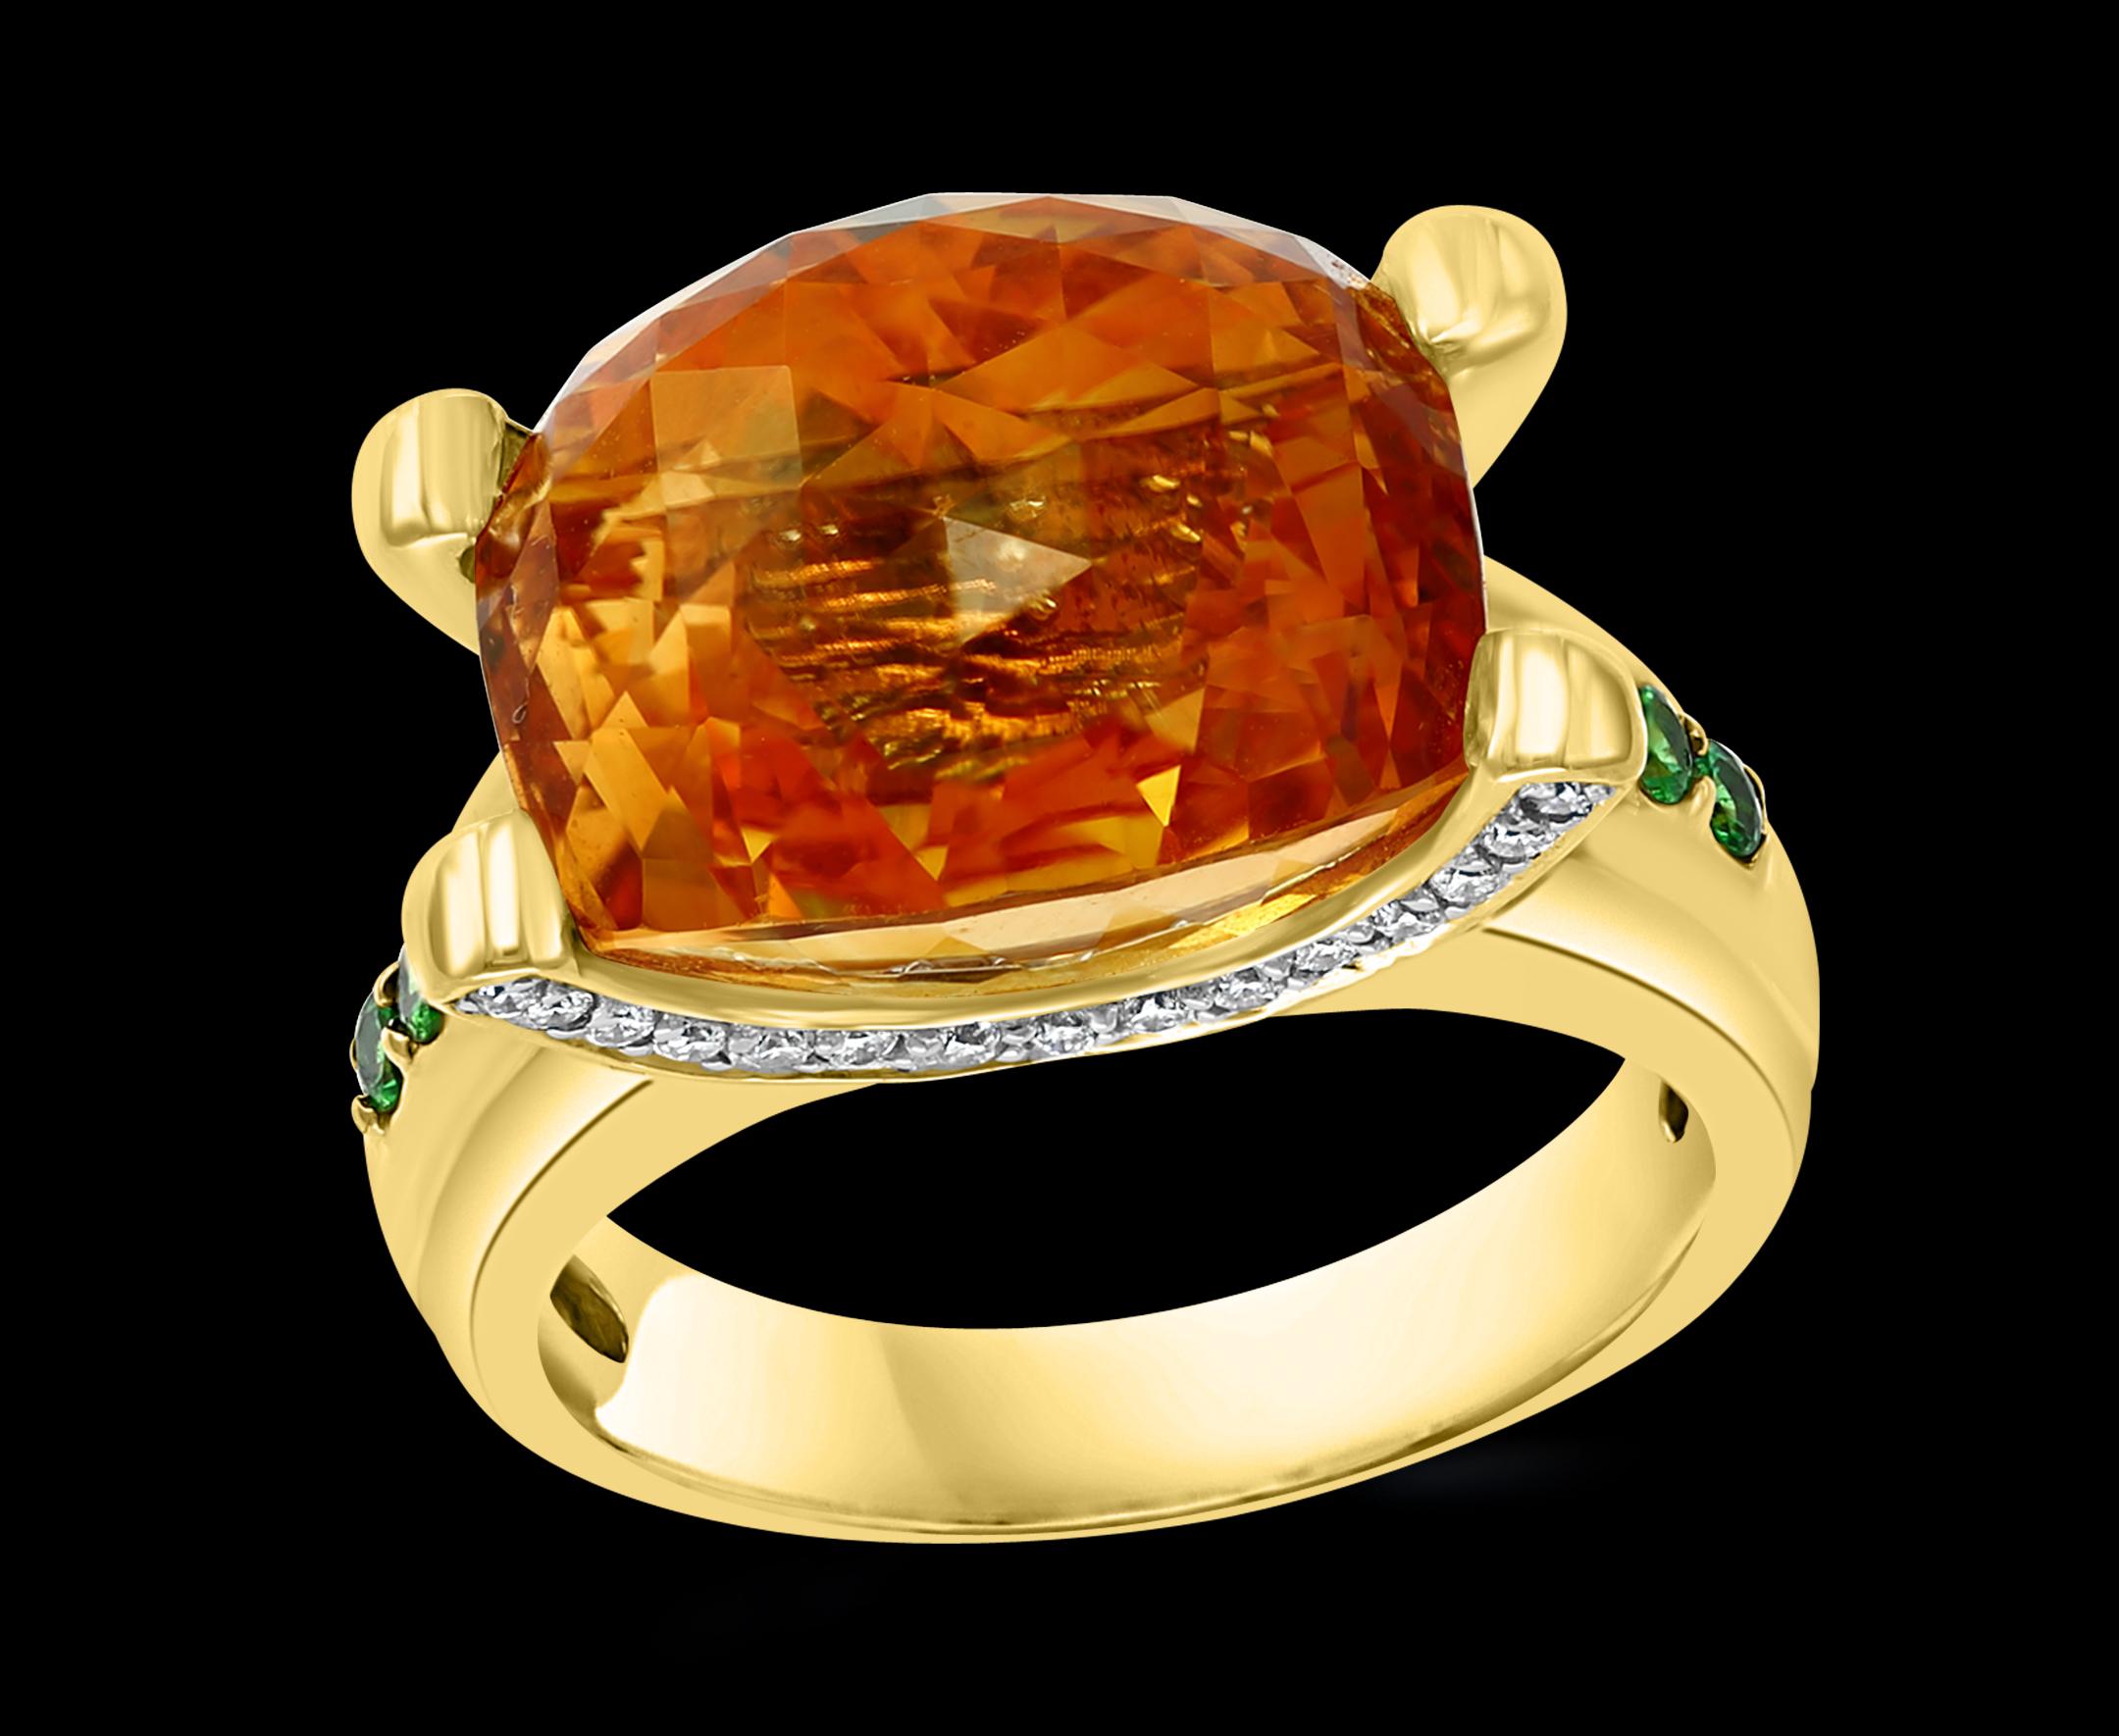 Approximately 10 Carat Oval Citrine Tsavorite And Diamond Ring In 18 Kt Yellow Gold , Estate
This is a ring which has a approximately 10 carat of high quality Citrine which has a special cut and checkerboard , the main stone is surrounded by